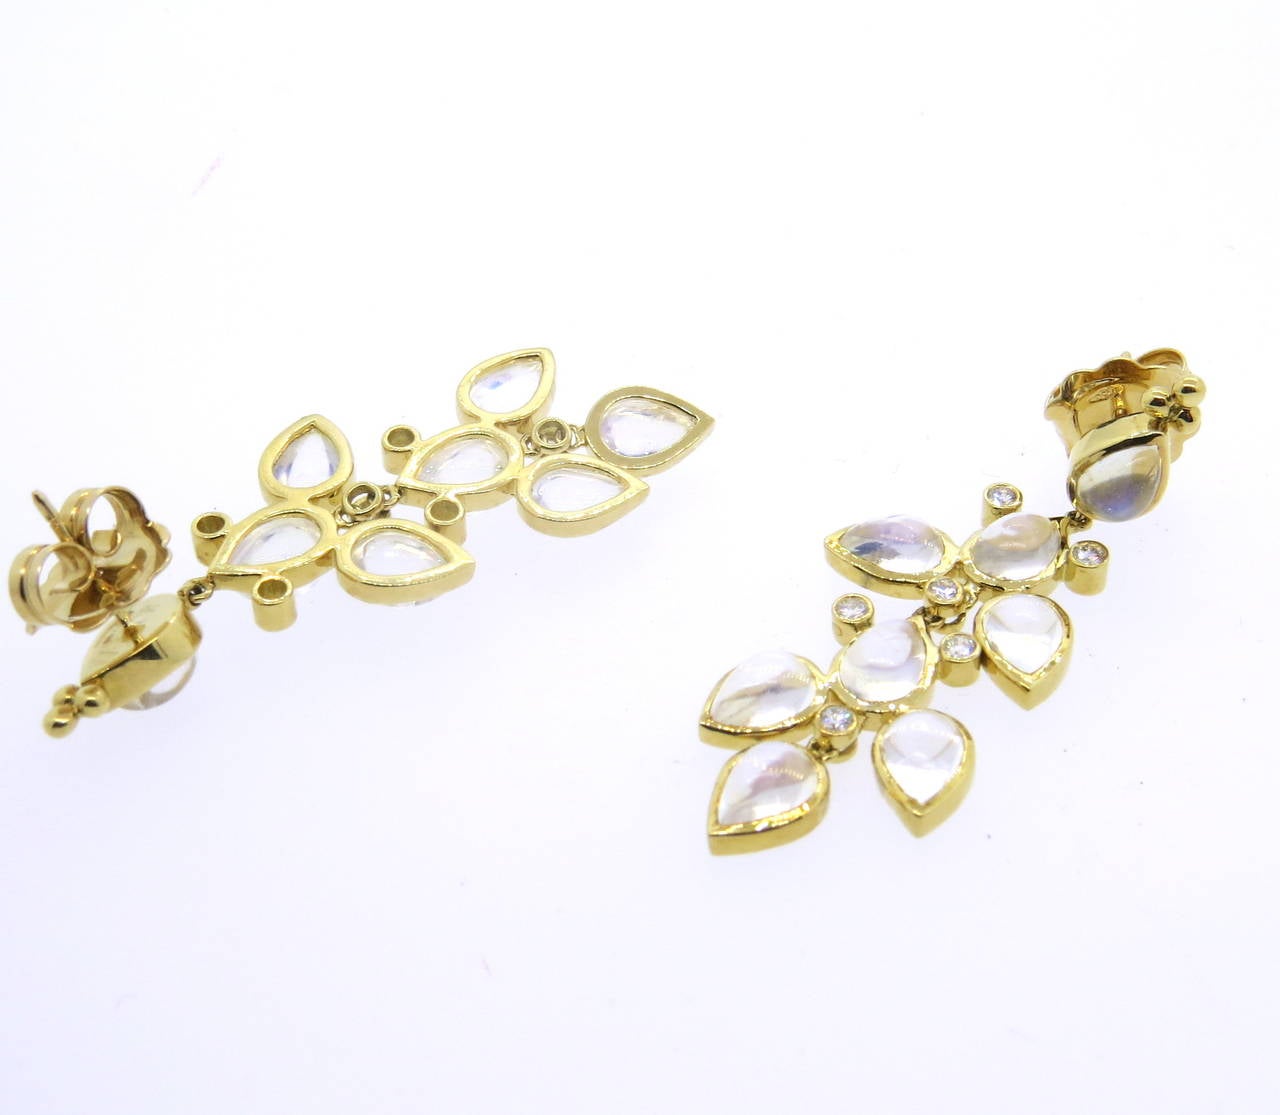 A pair of new Temple St. Clair 18k yellow gold earrings, decorated with 0.40ctw in G/VS diamonds and moonstone cabochons. Earrings measure 50mm x 20mm. marked with Temple hallmark and 750. Weight - 13.4 grams
Retail for $5500